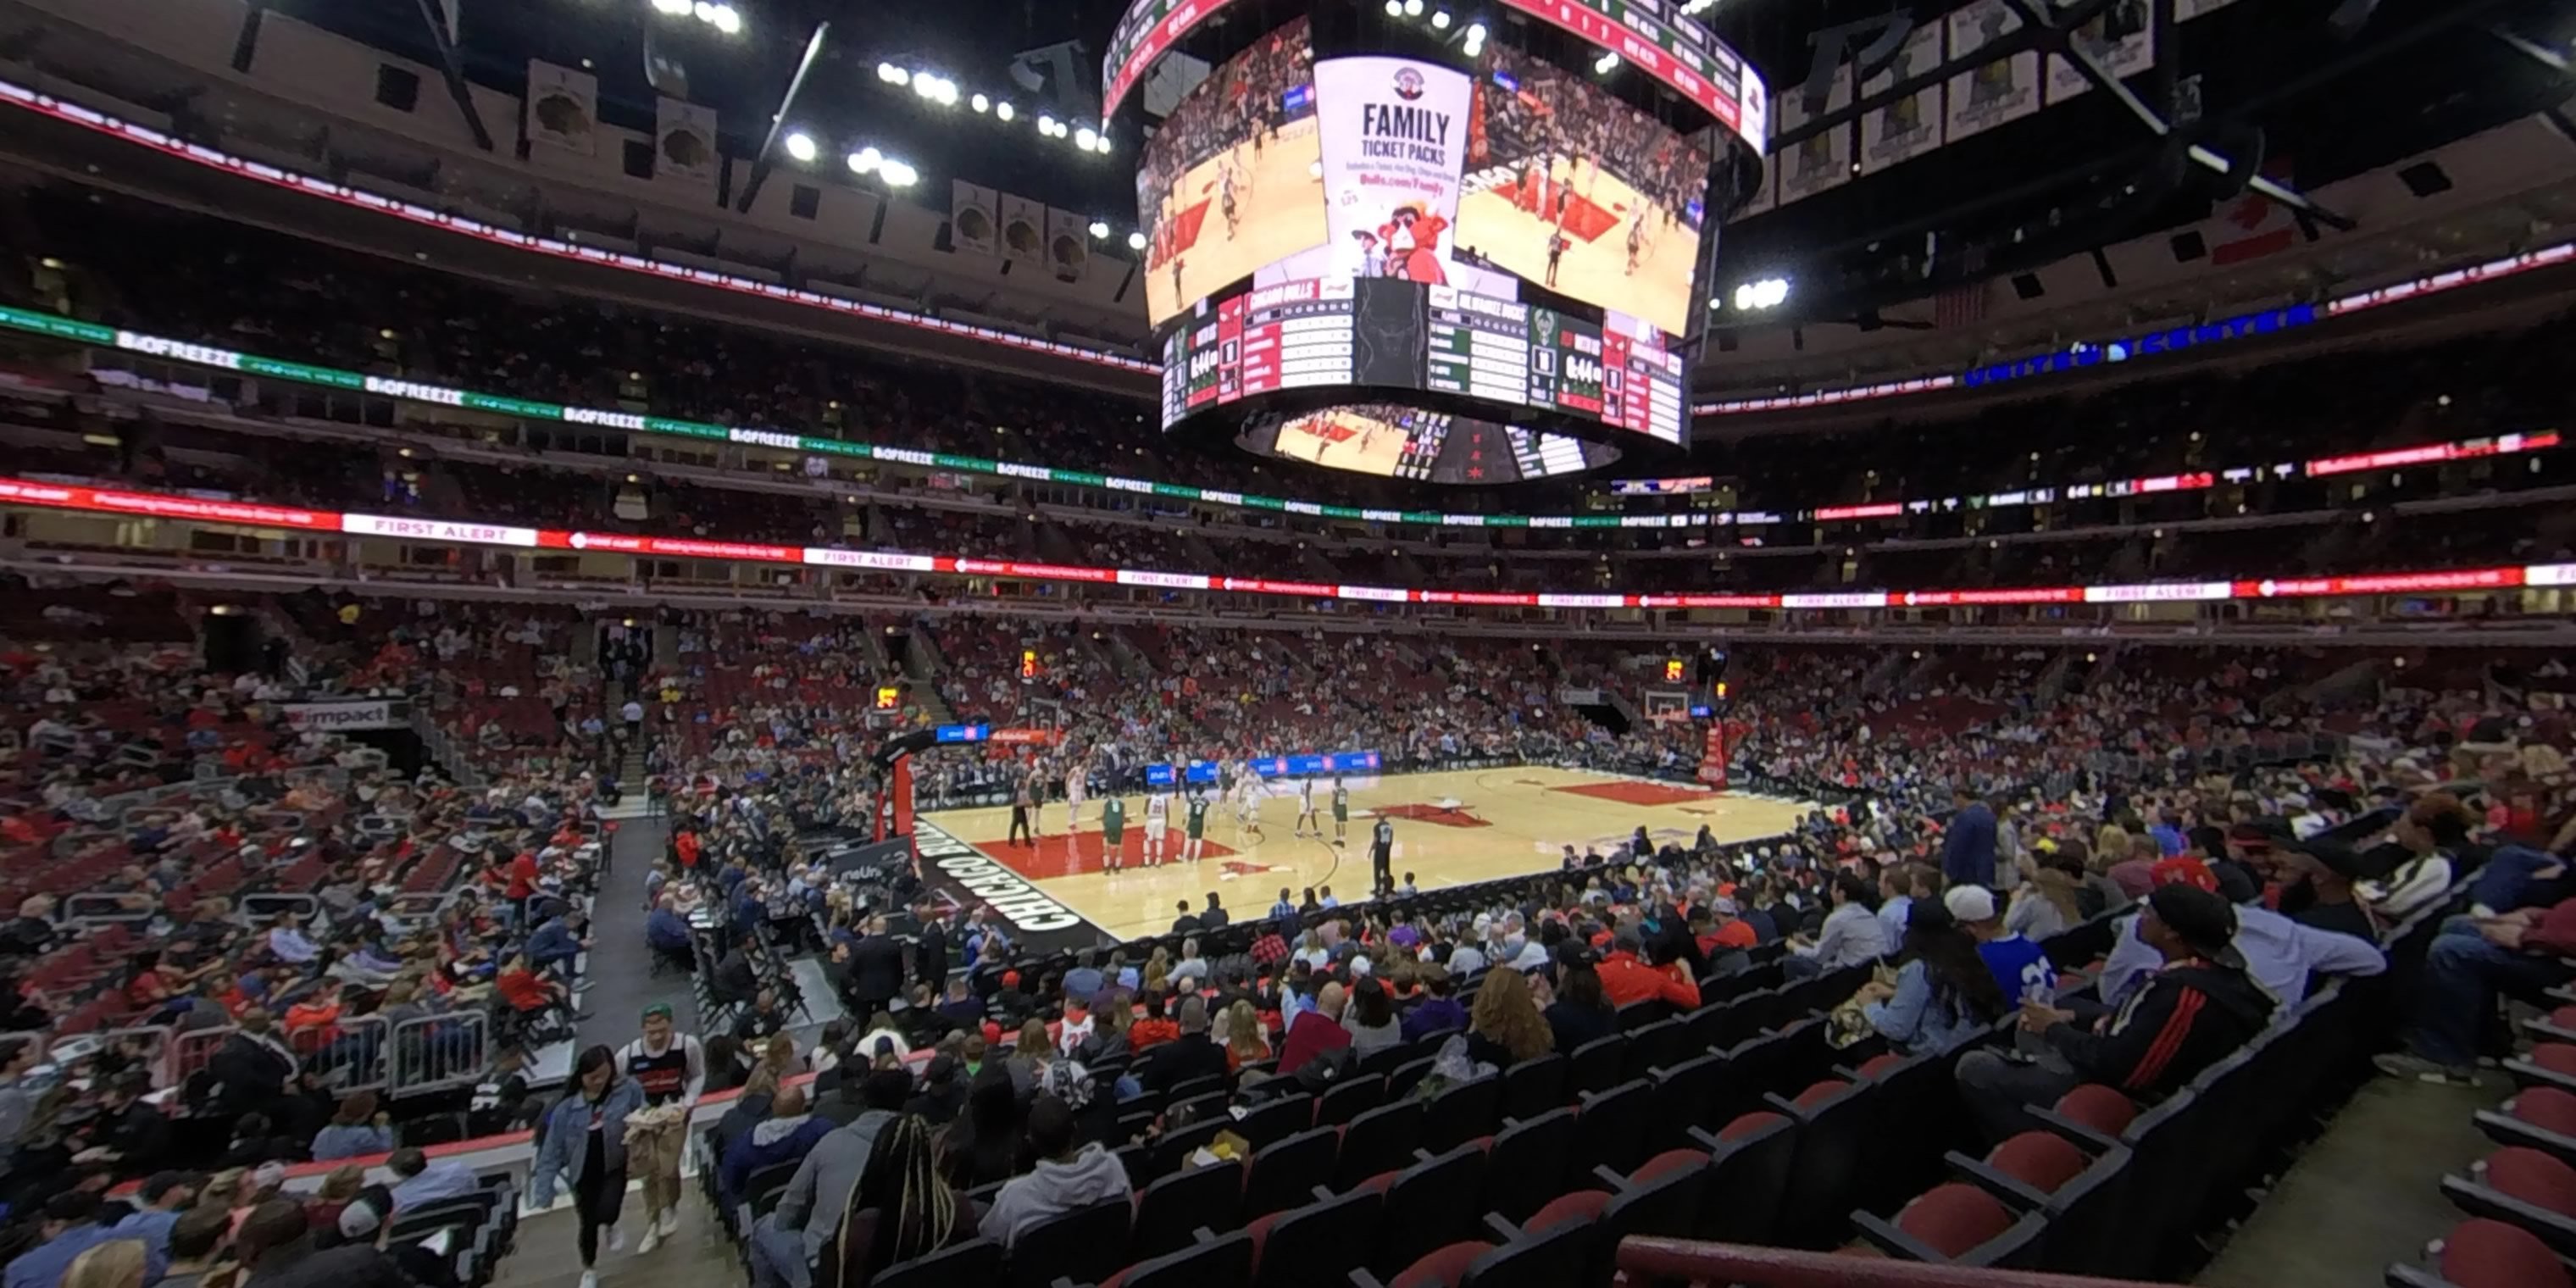 section 113 panoramic seat view  for basketball - united center